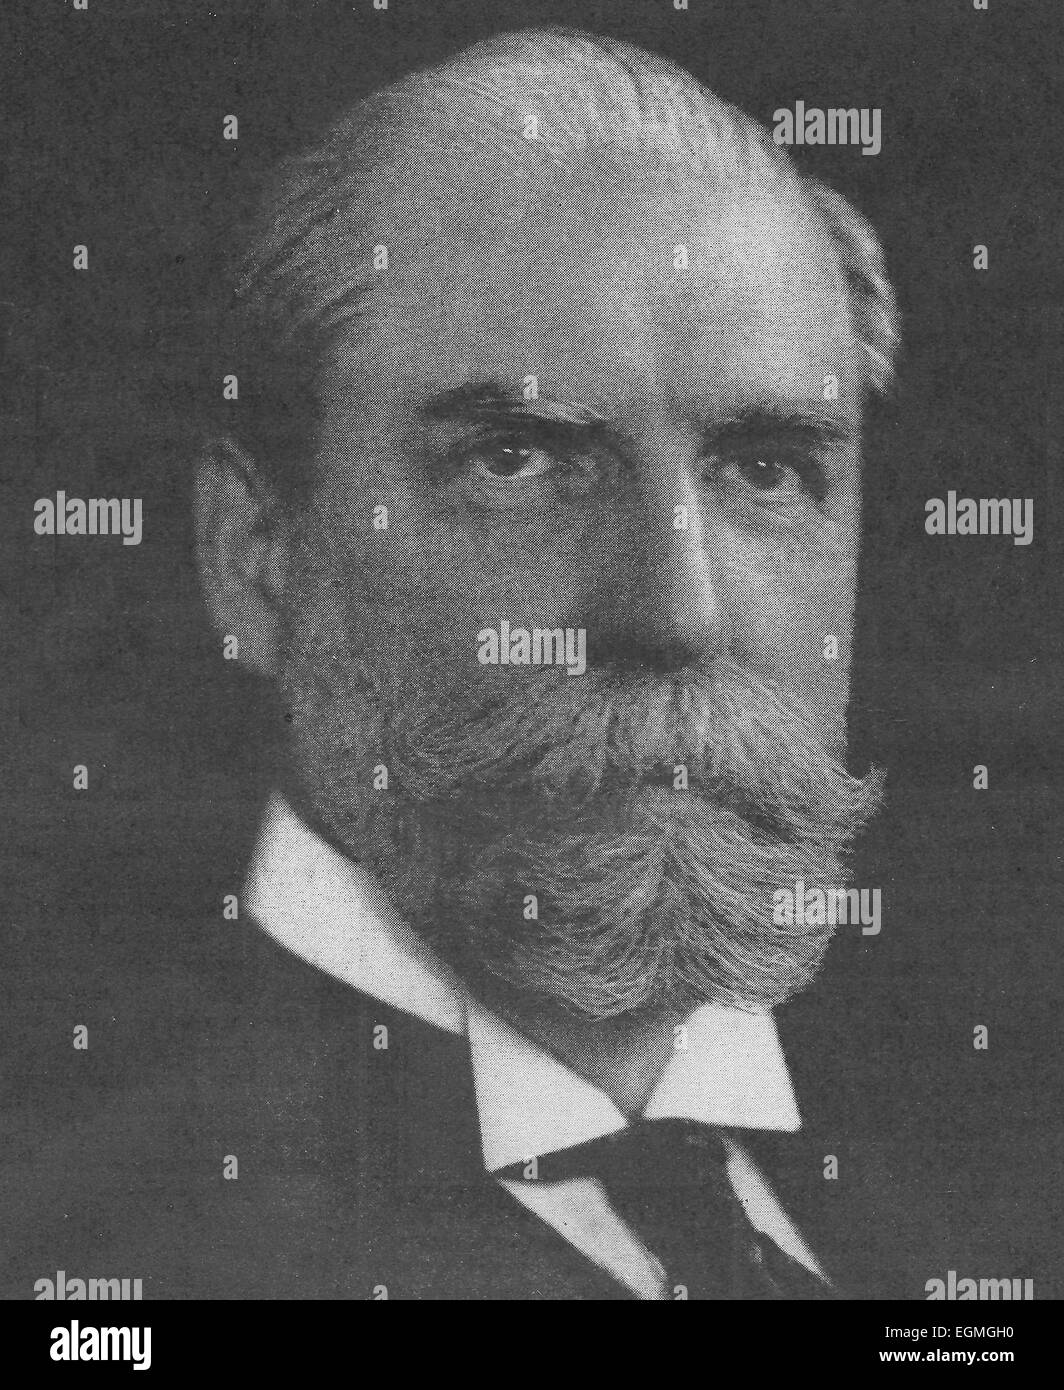 Charles Evans Hughes, Sr.-  an American statesman, lawyer and Republican politician from New York. He served as the 36th Governor of New York (1907–1910), Associate Justice of the Supreme Court of the United States (1910–1916), United States Secretary of State (1921–1925), a judge on the Court of International Justice (1928–1930), and the 11th Chief Justice of the United States (1930–1941). He was the Republican candidate in the 1916 U.S. Presidential election, losing narrowly to incumbent President Woodrow Wilson. Stock Photo